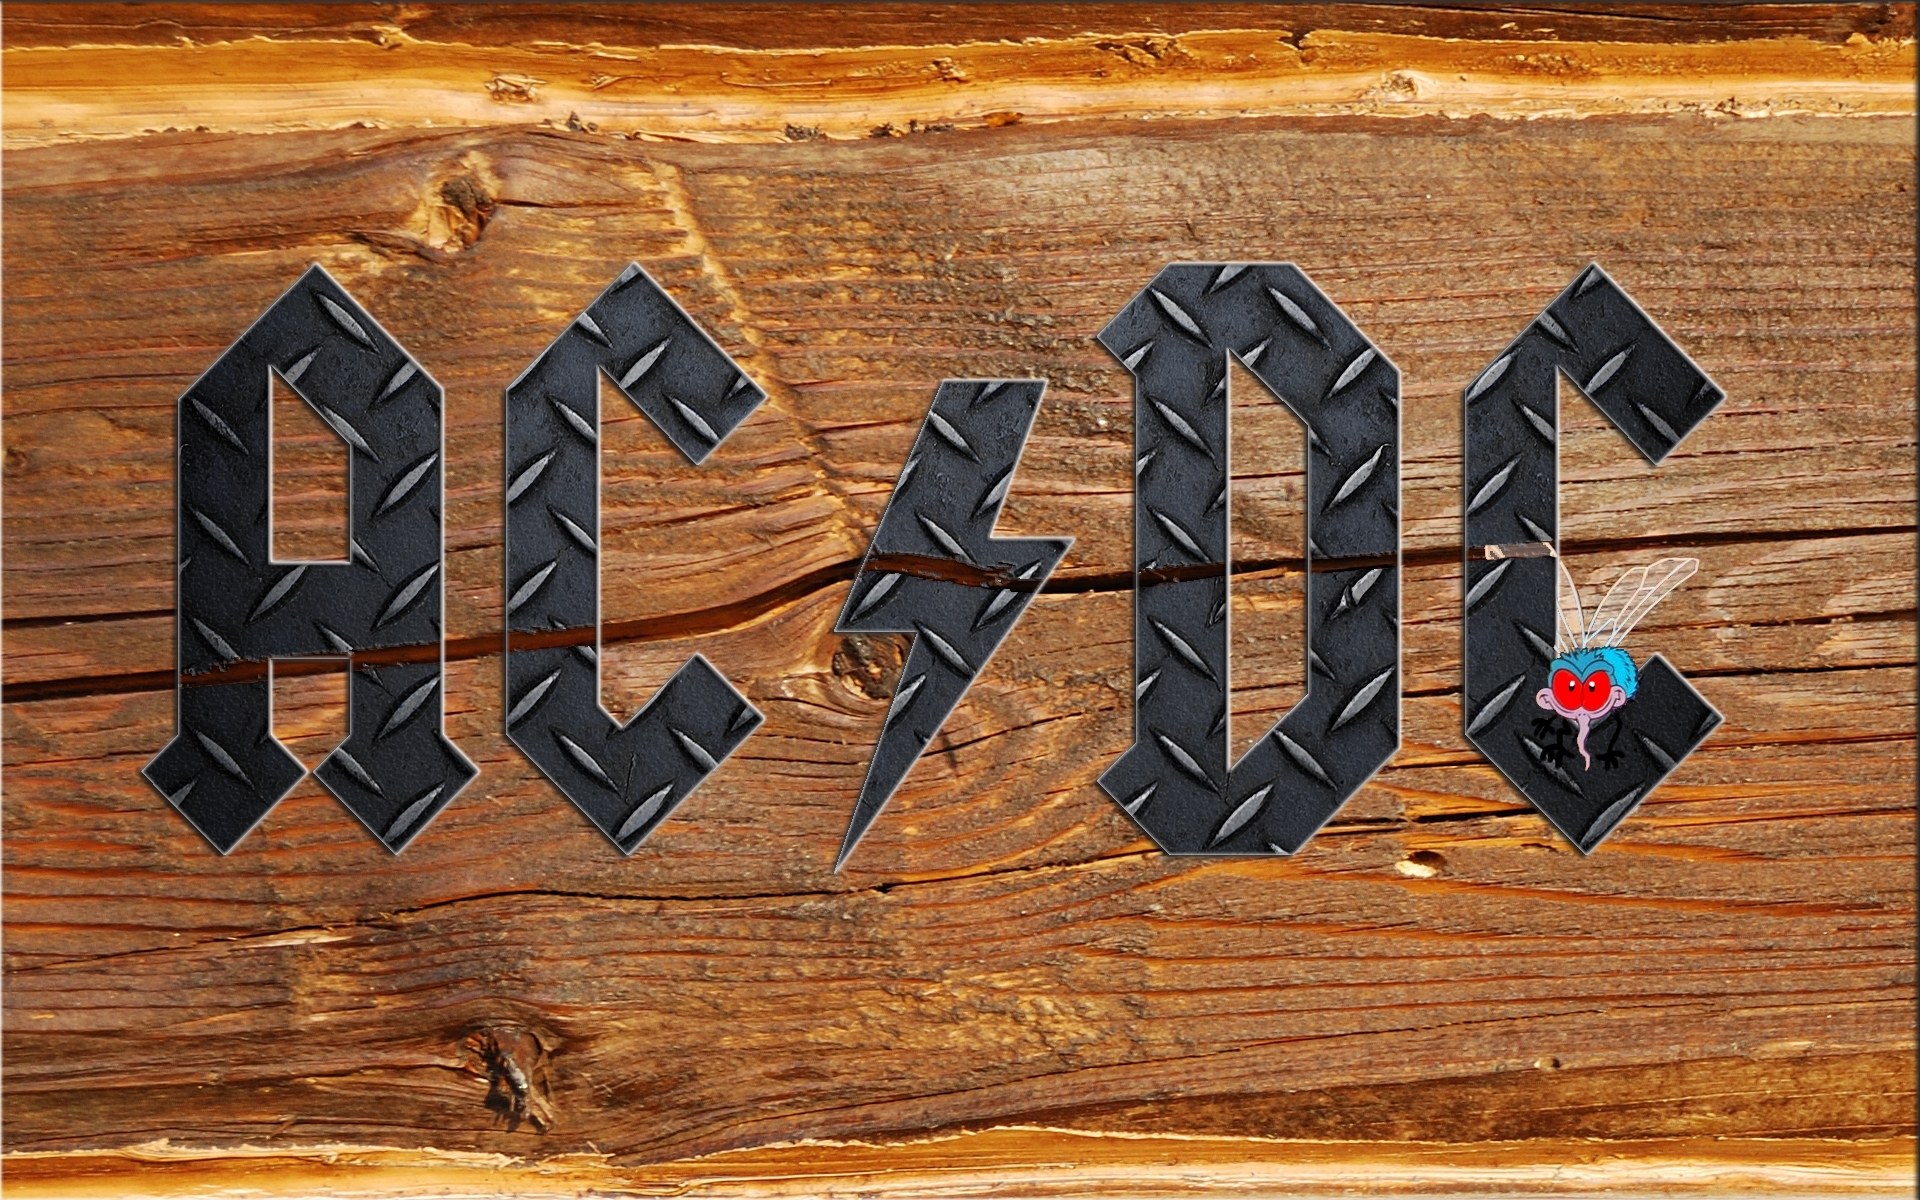 ac dc, Ac, Dc, Acdc, Heavy, Metal, Hard, Rock, Classic, Bands, Groups, Entertainment, Men, People, Male, Logo, Album, Covers Wallpaper